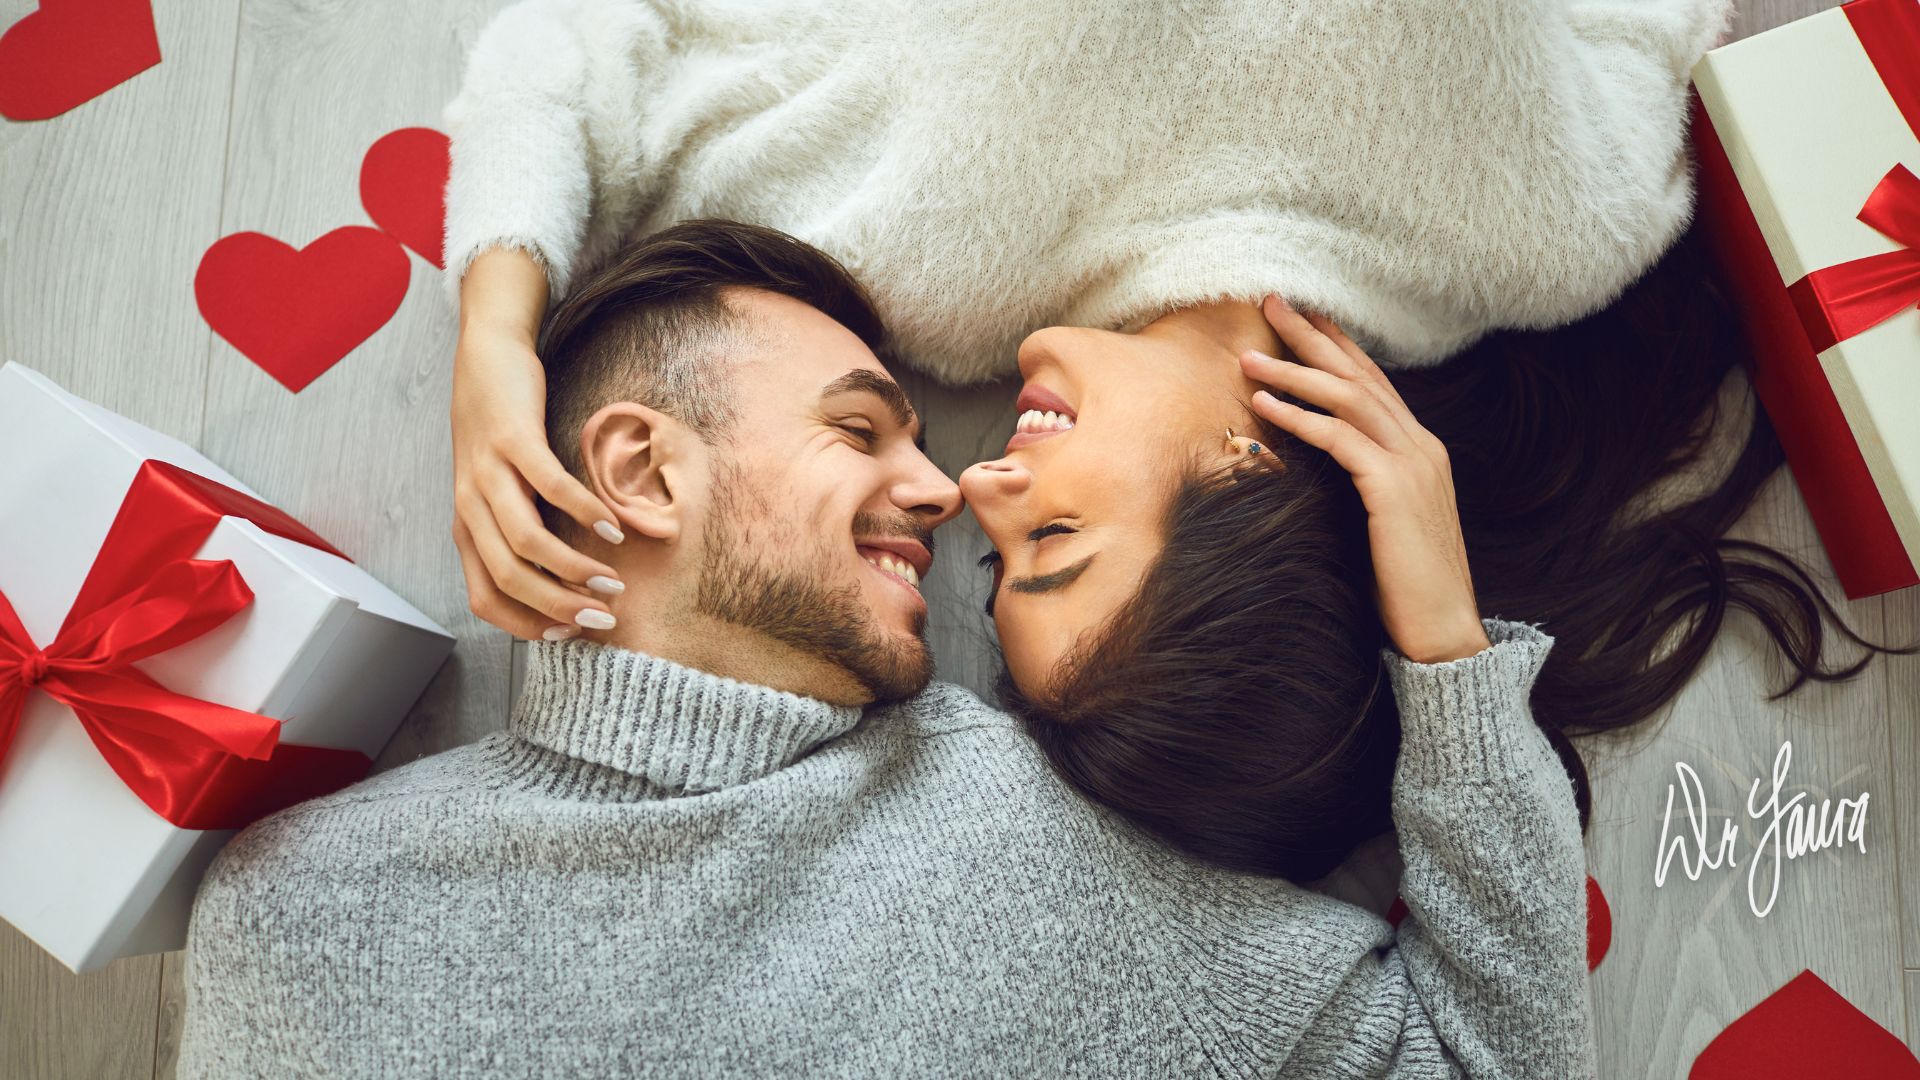 Woman and man lie next to each other and looking at one another